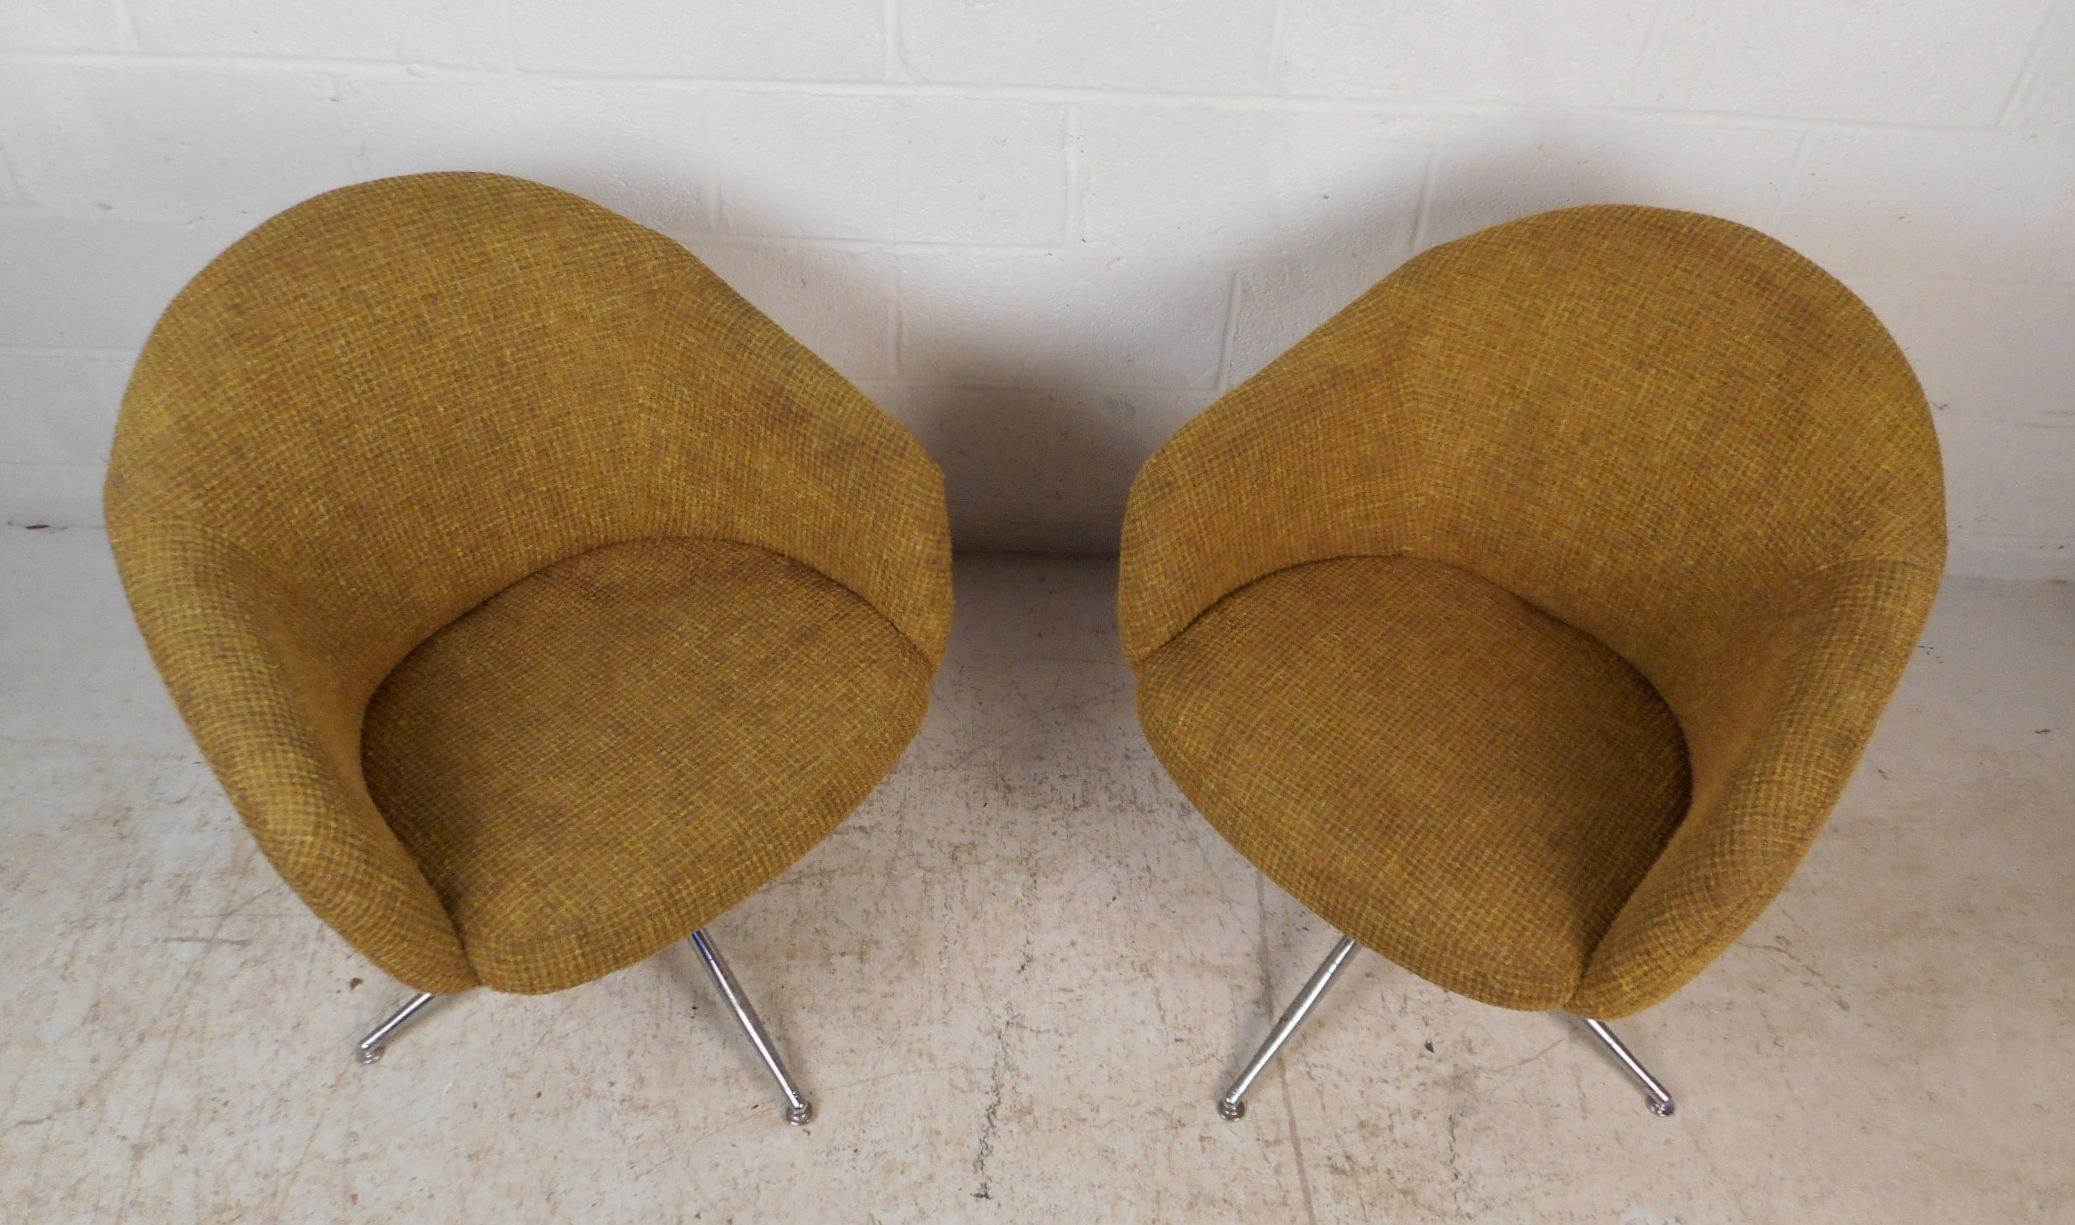 This stylish pair of vintage modern swivel chairs feature barrel backrests, winged armrests, and a chrome swivel base with four splayed legs. A sleek and comfortable design covered in a plush gold and green colored upholstery by Viko Baumritter.